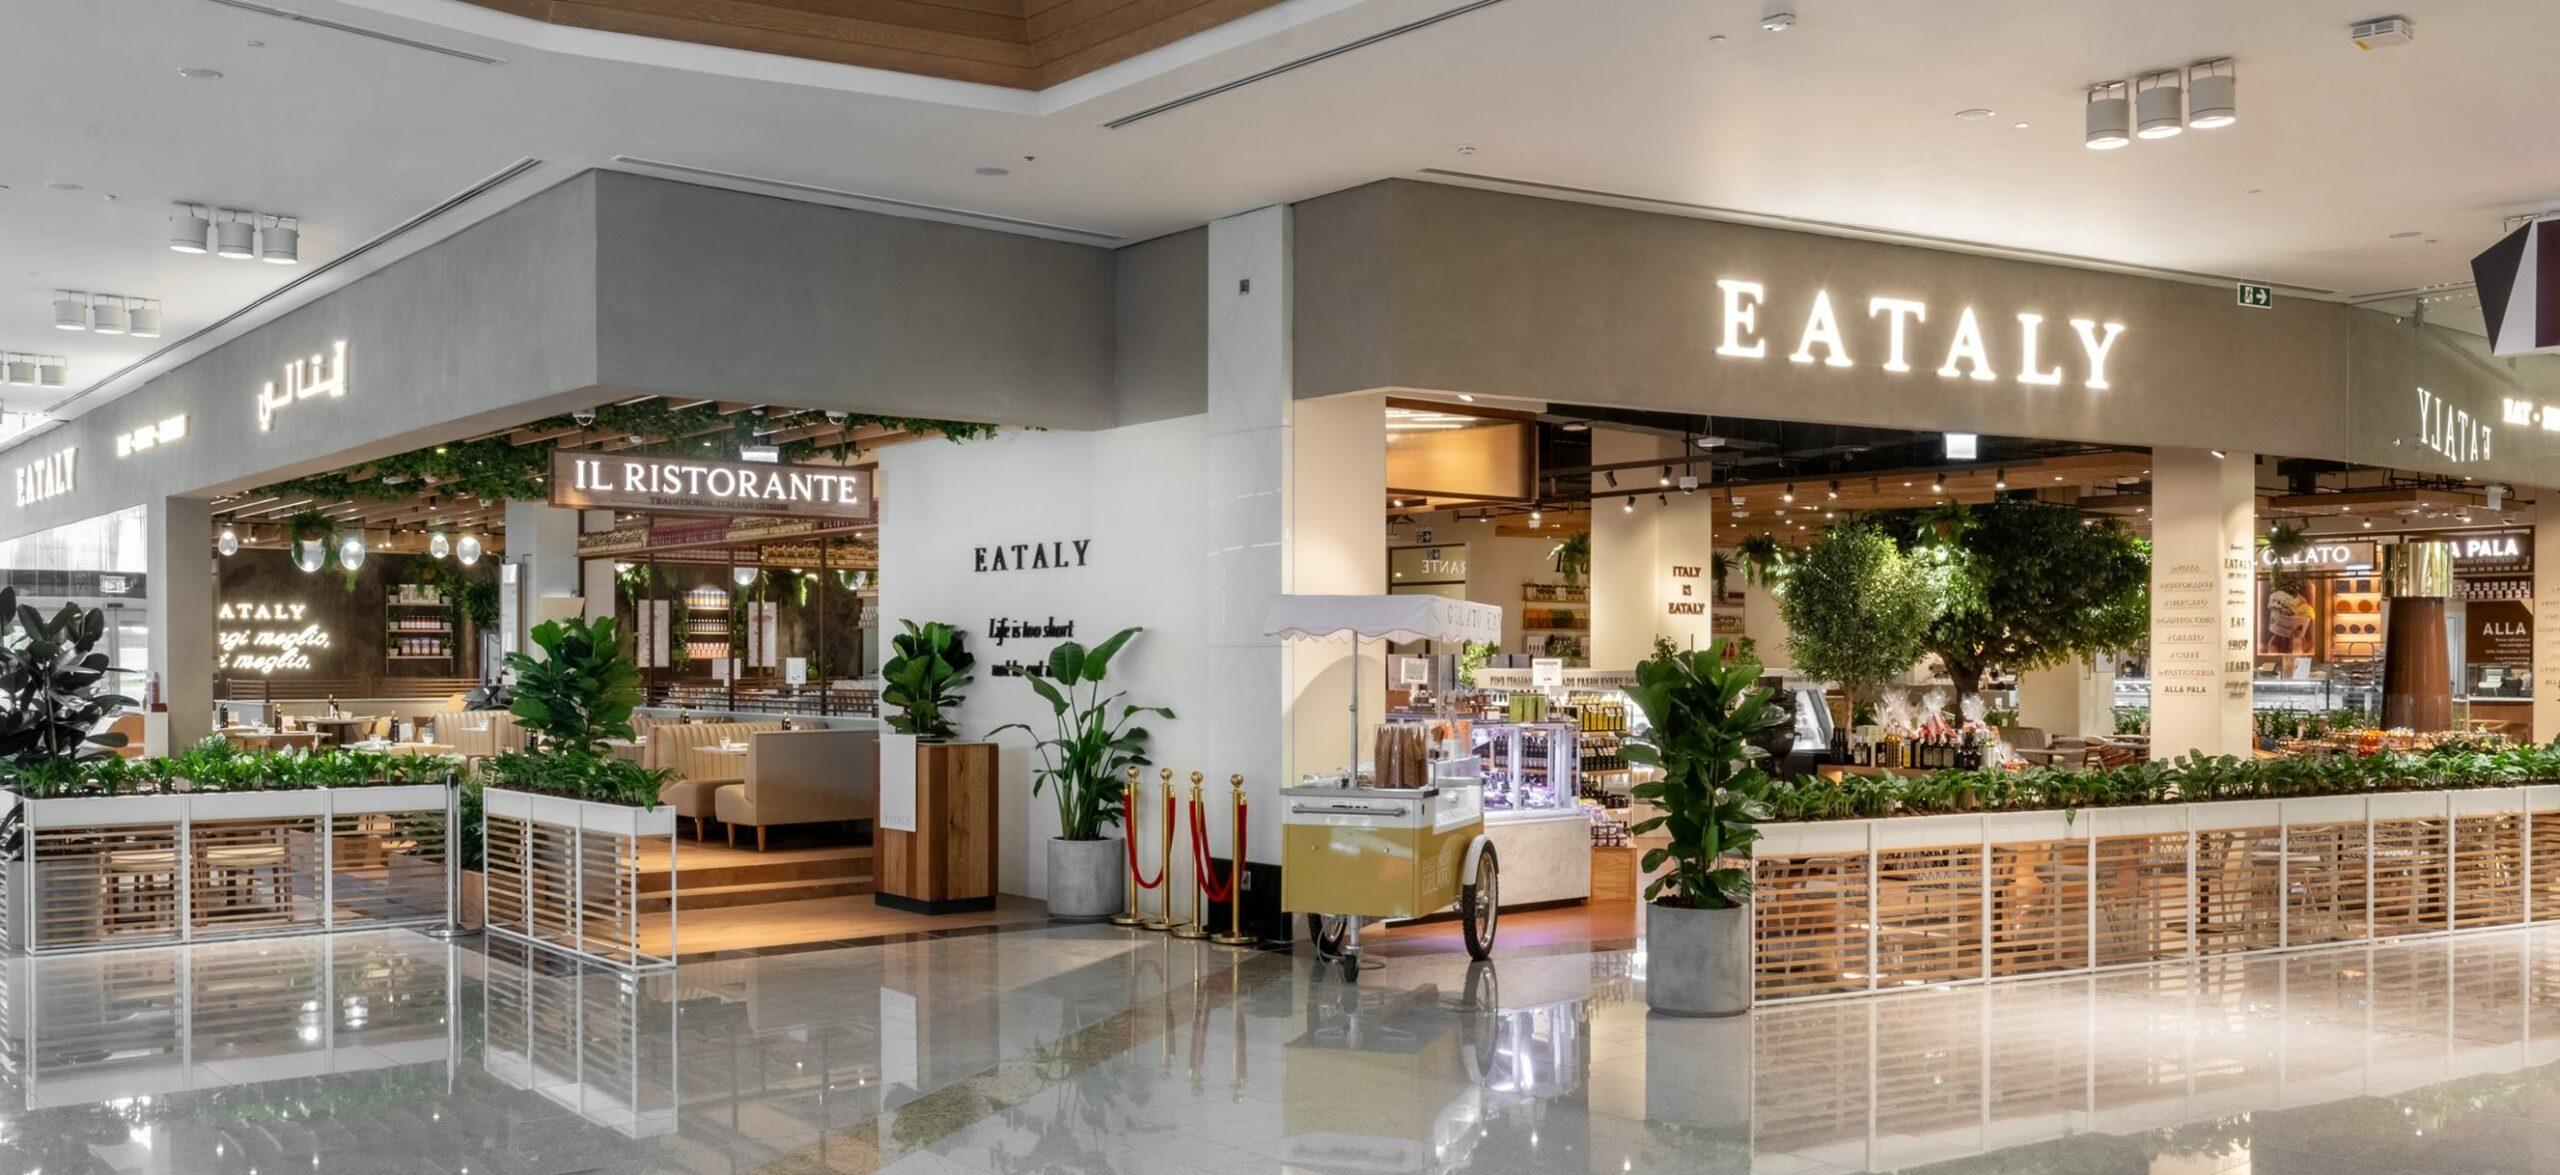 Eataly brings a slice of Italy to Abu Dhabi’s Reem Mall-image